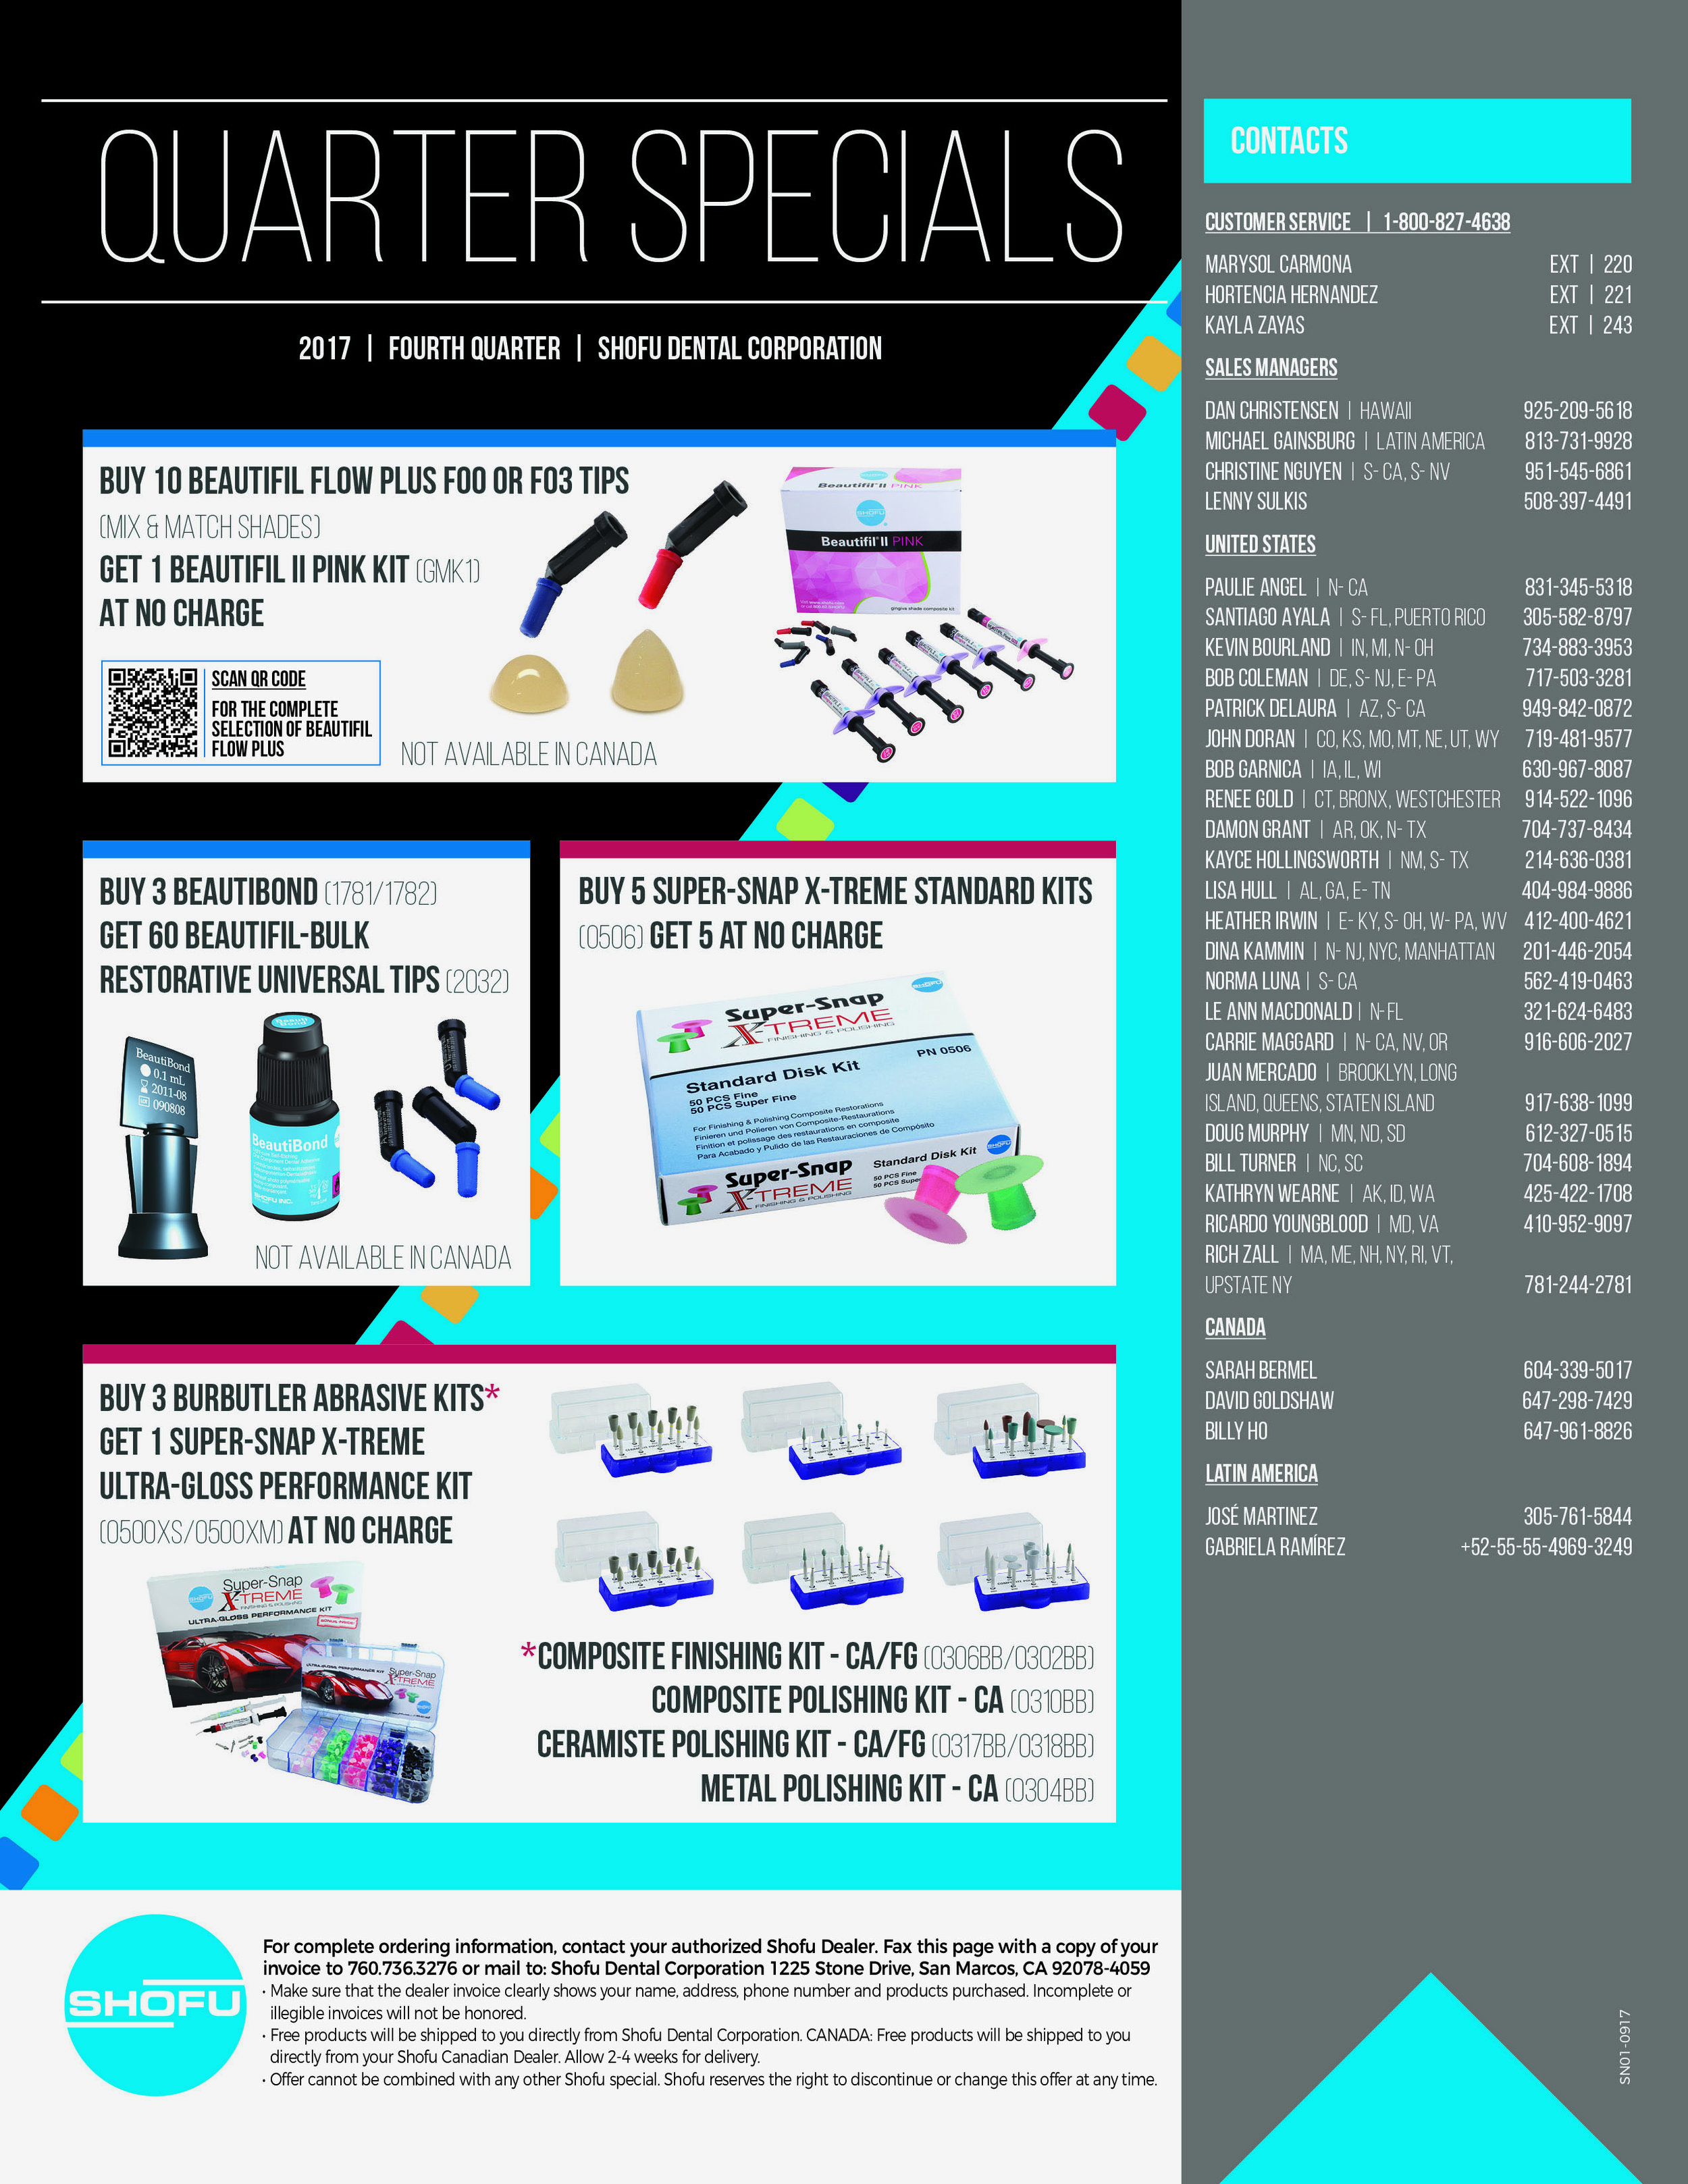  Special offers and contacts (BACK) 